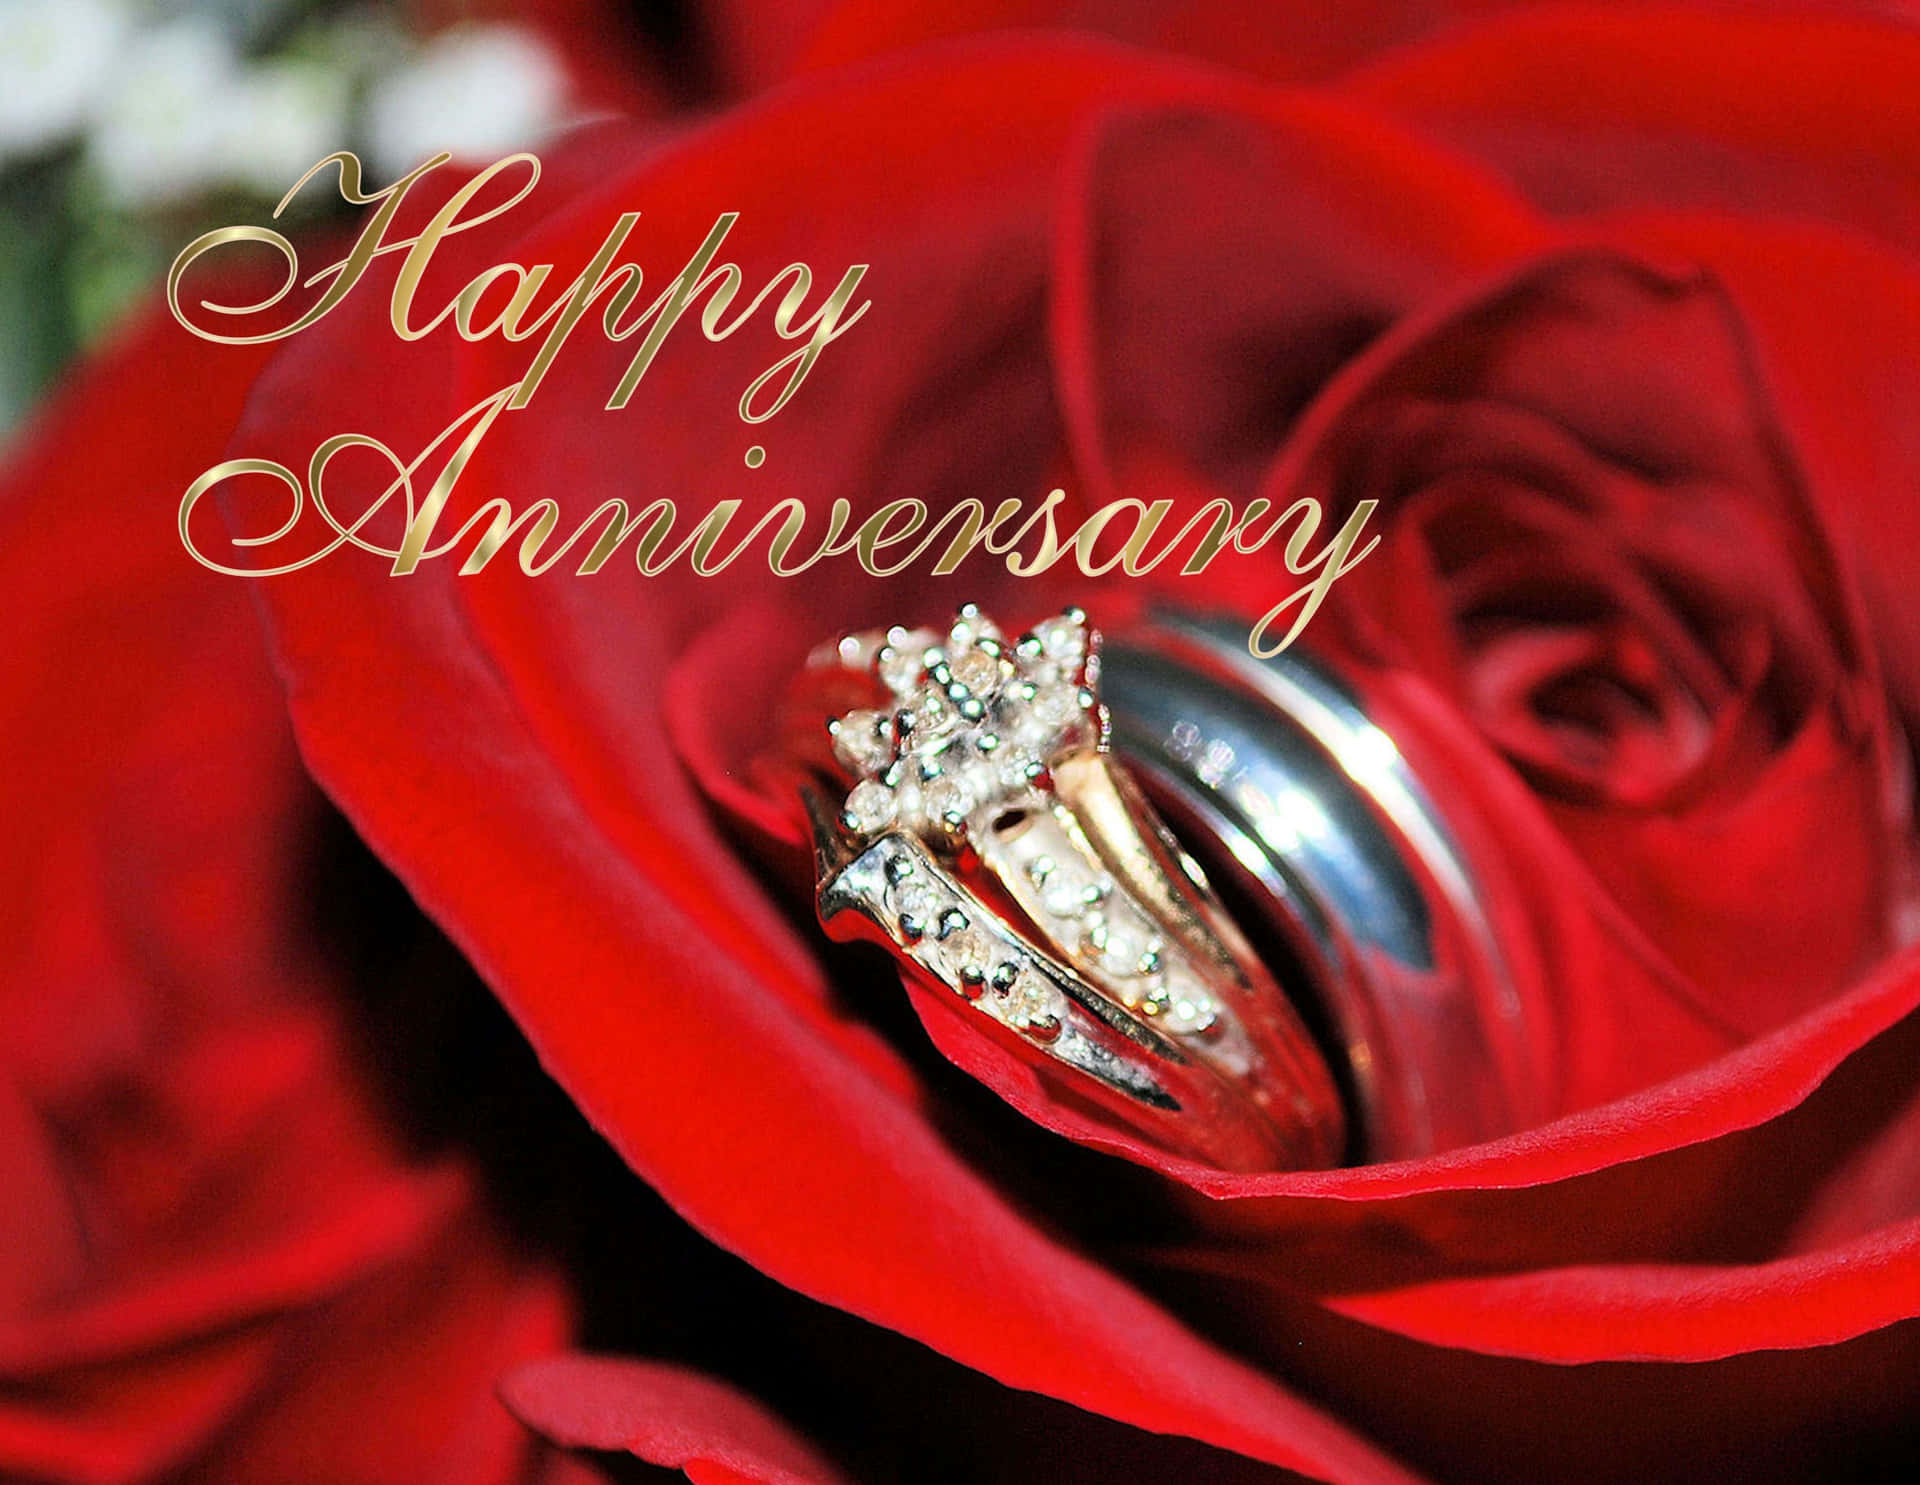 "Celebrating a special day - Happy Anniversary!"